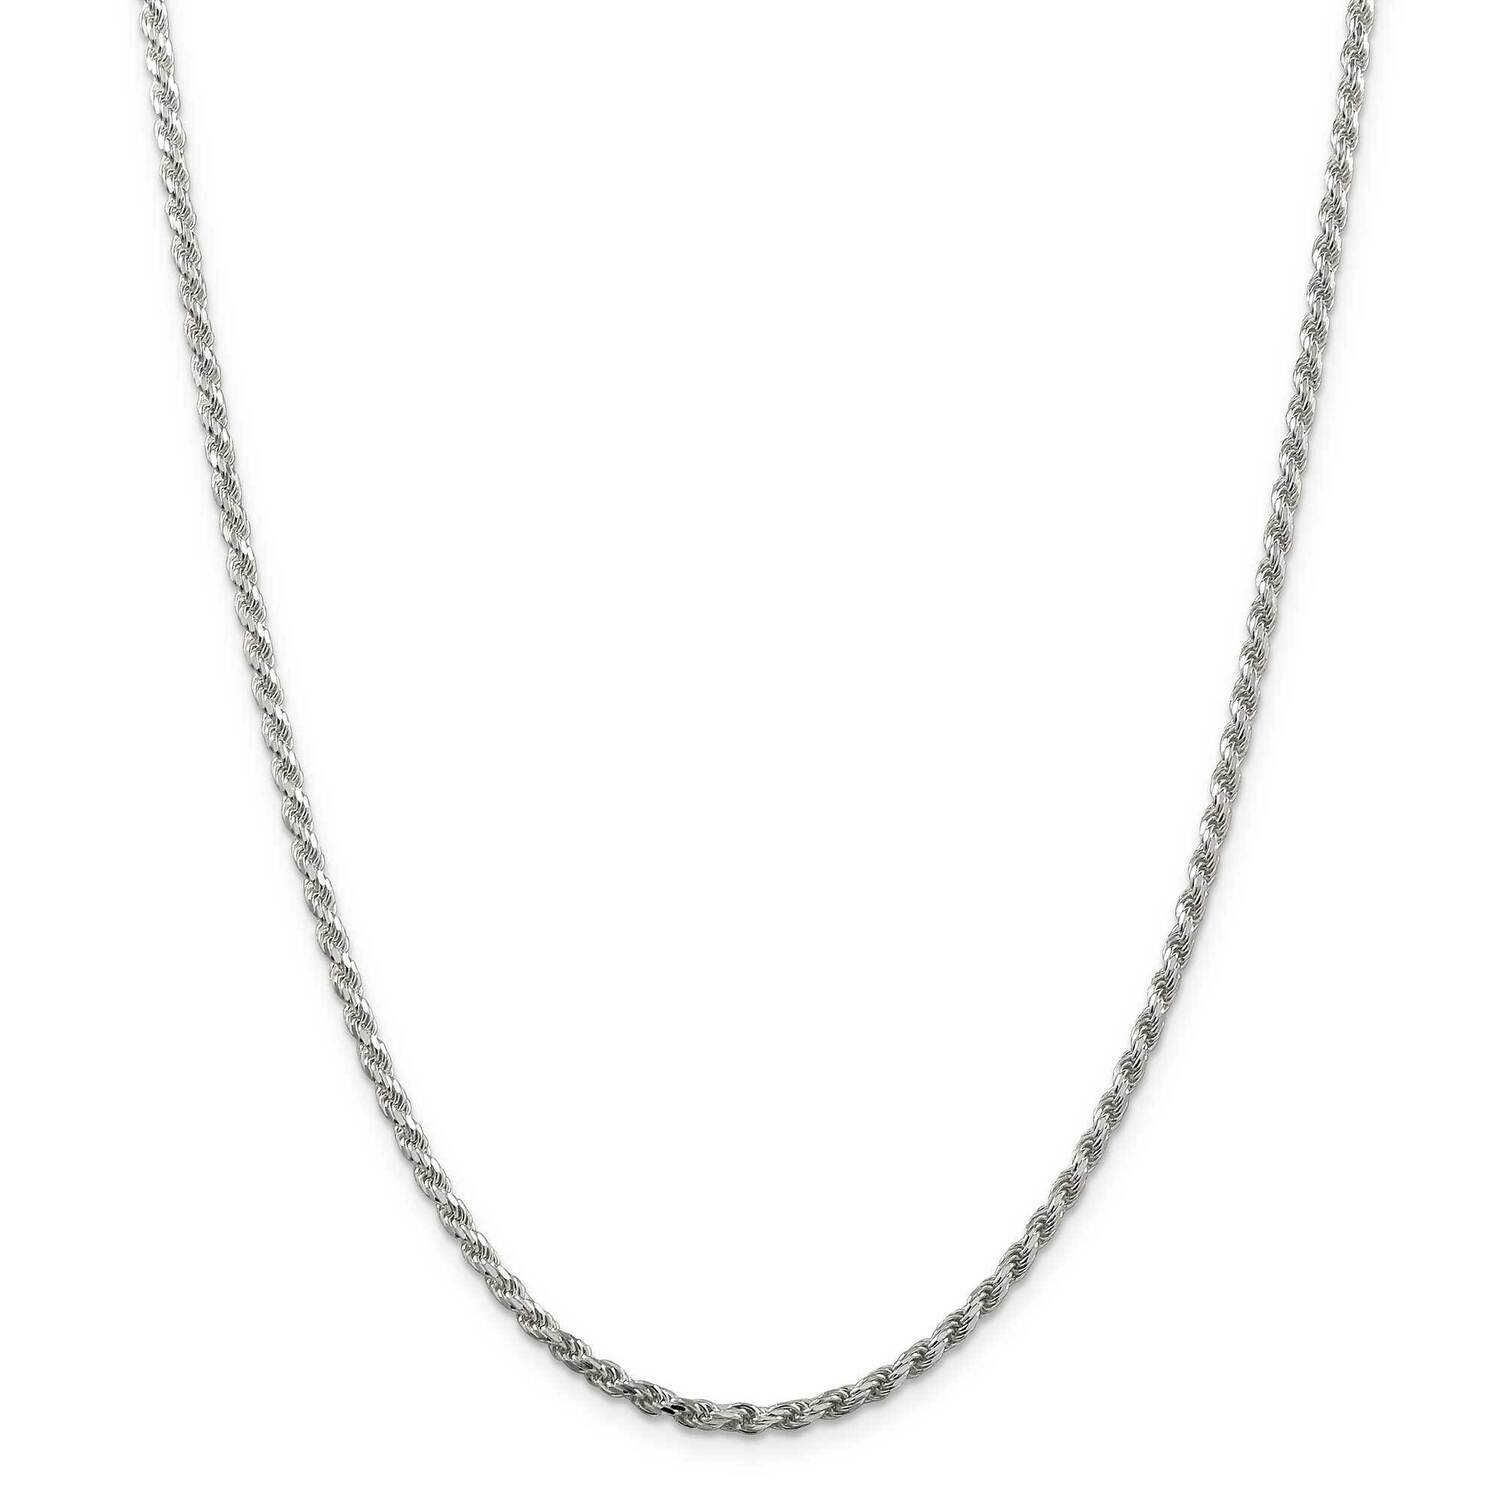 2.75mm Diamond-Cut Rope Chain with 2 Inch Extender 18 Inch Sterling Silver QDC060E-18